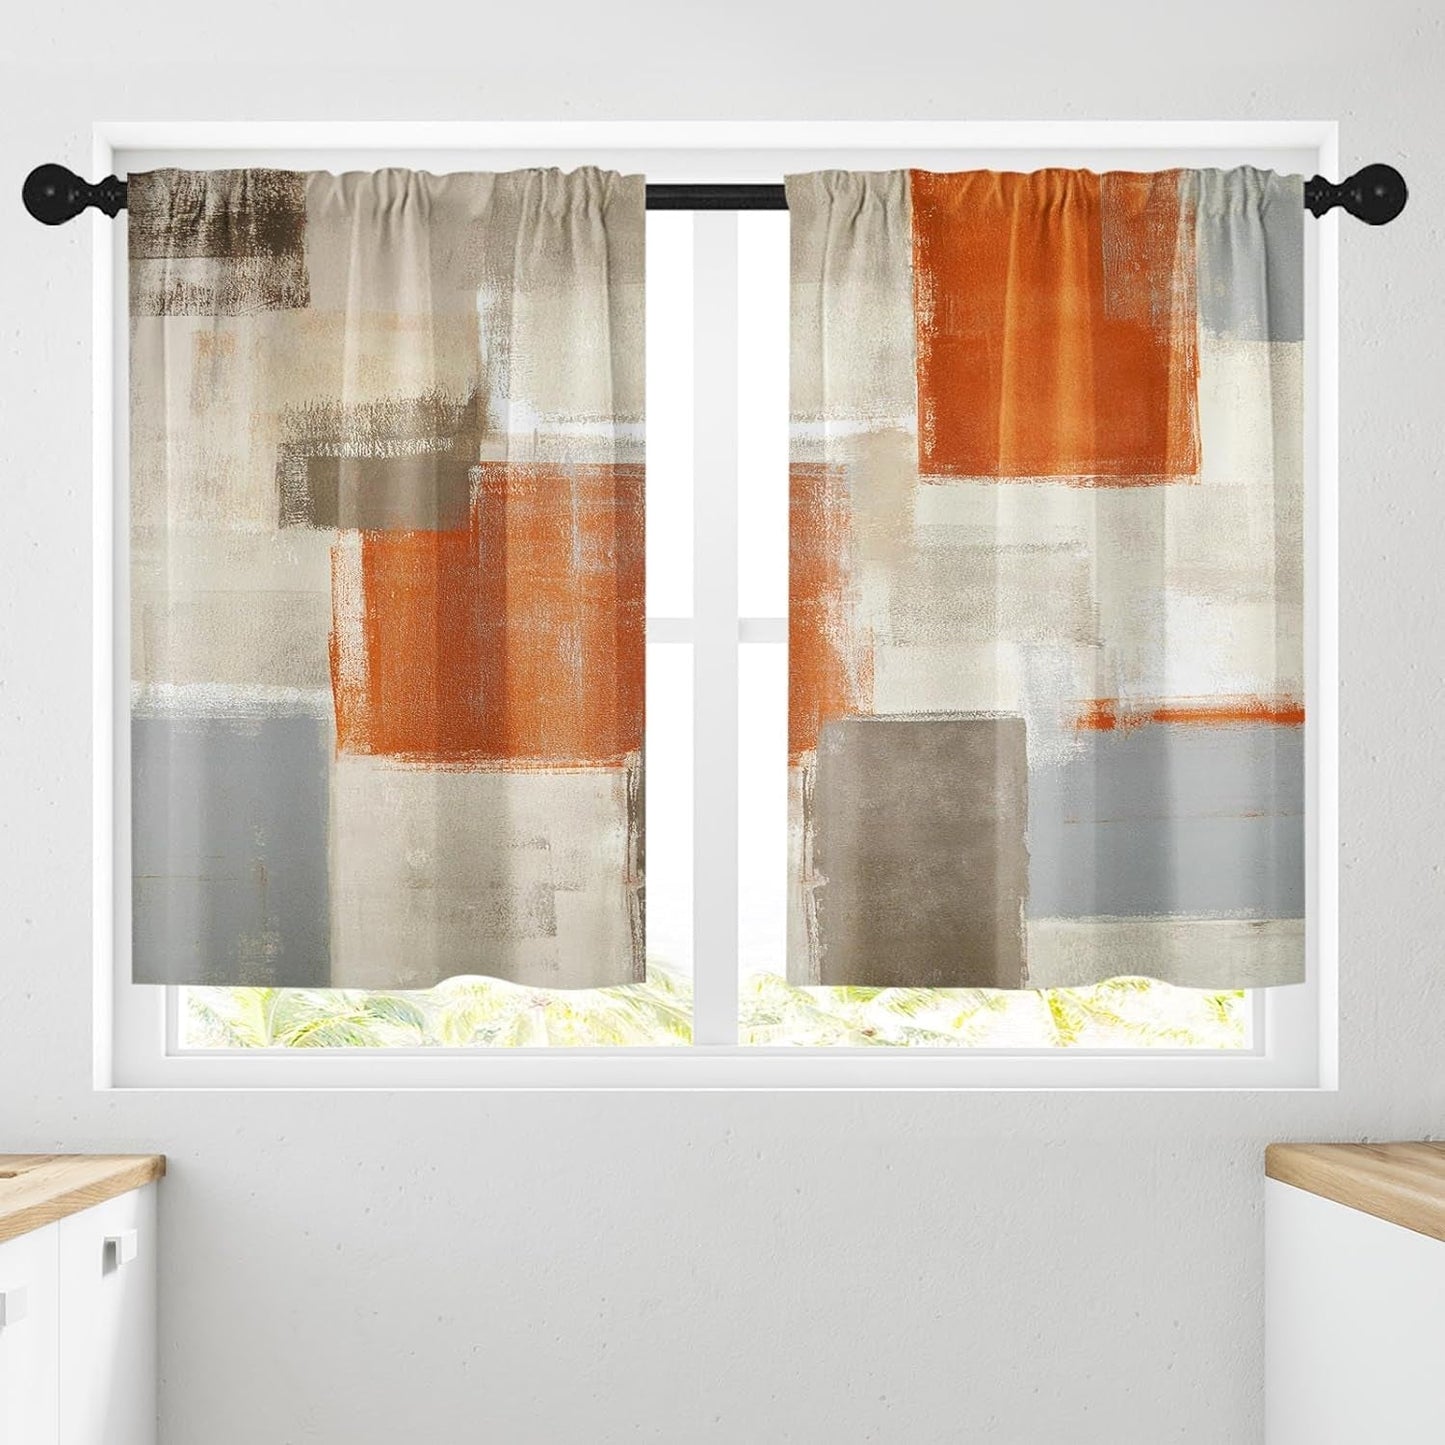 Emvency Farmhouse Kitchen Curtains Orange Abstract Window Curtains Short Tier Curtains over Sink, Modern Art Painting Decor Rod Pocket Window Drapes Set of 2 (26X36 Inch)